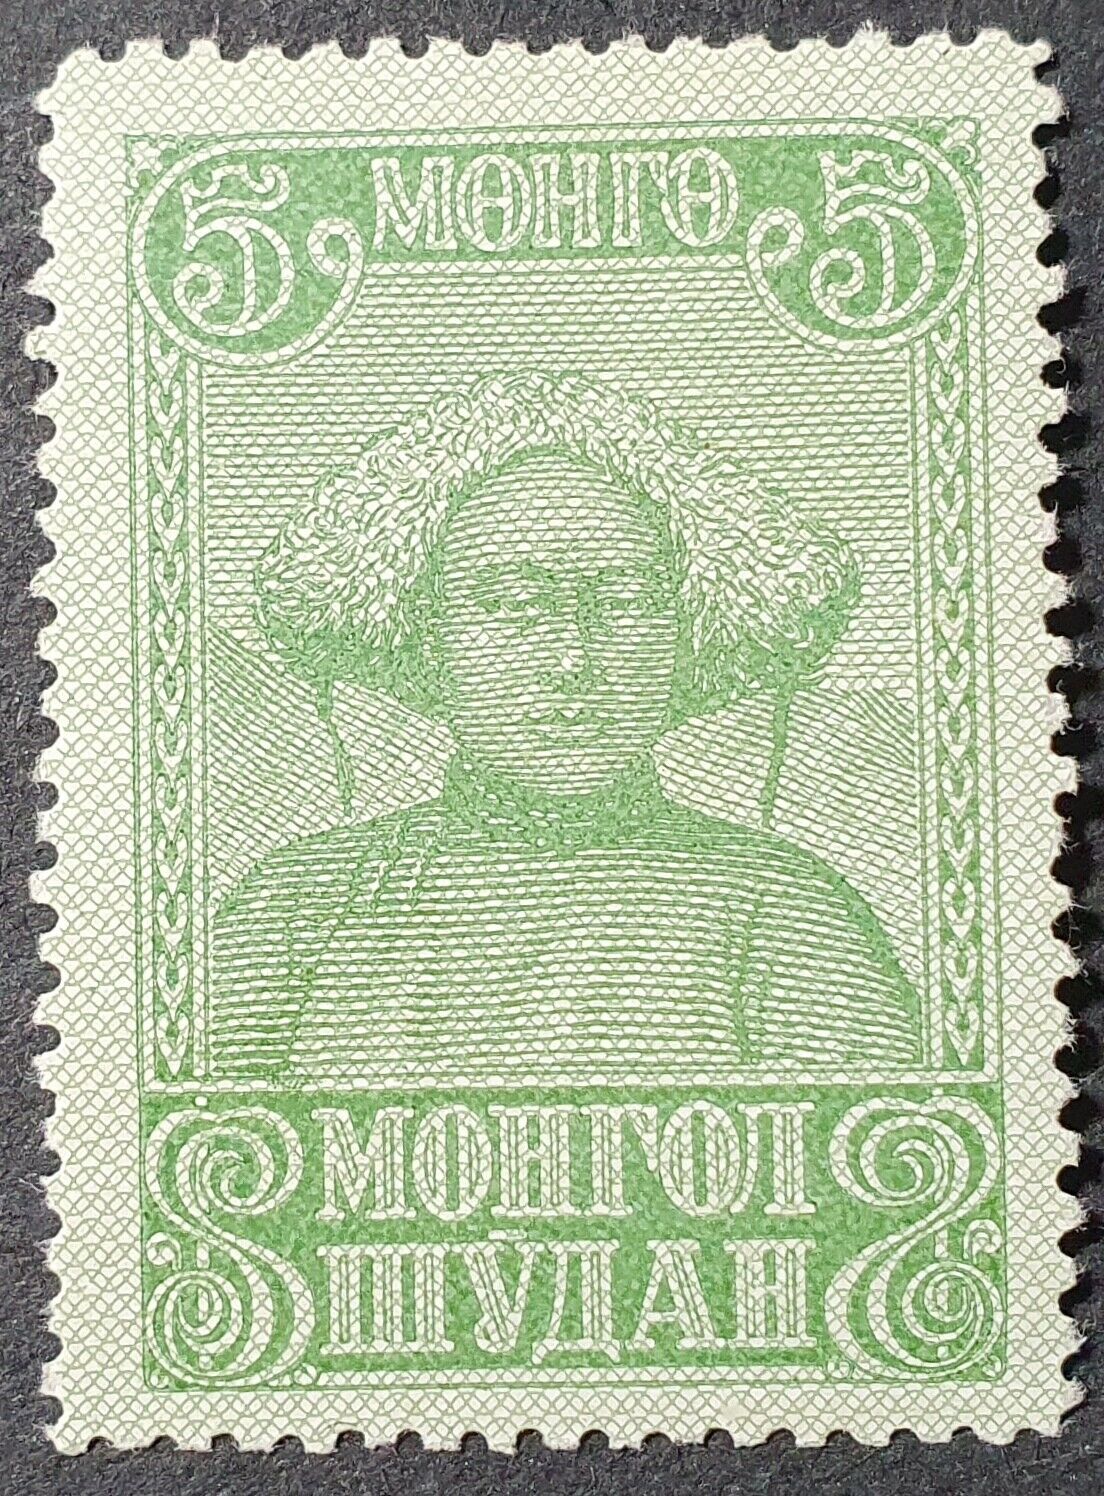 Mongolia 1943 59, The Pictorial Issue, 5m, Mnh